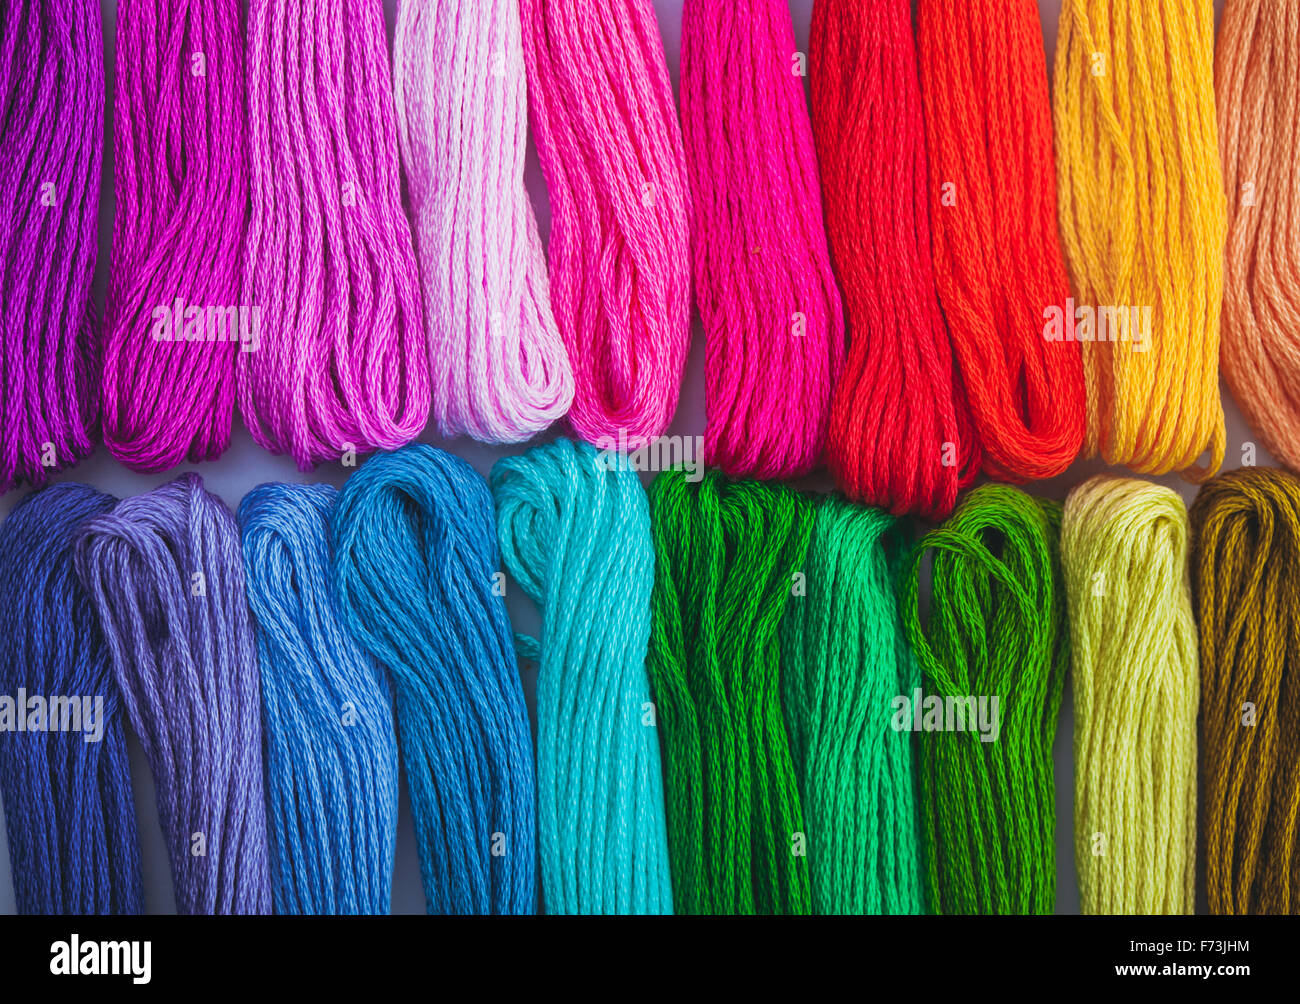 the-embroidery-floss-stock-photo-alamy